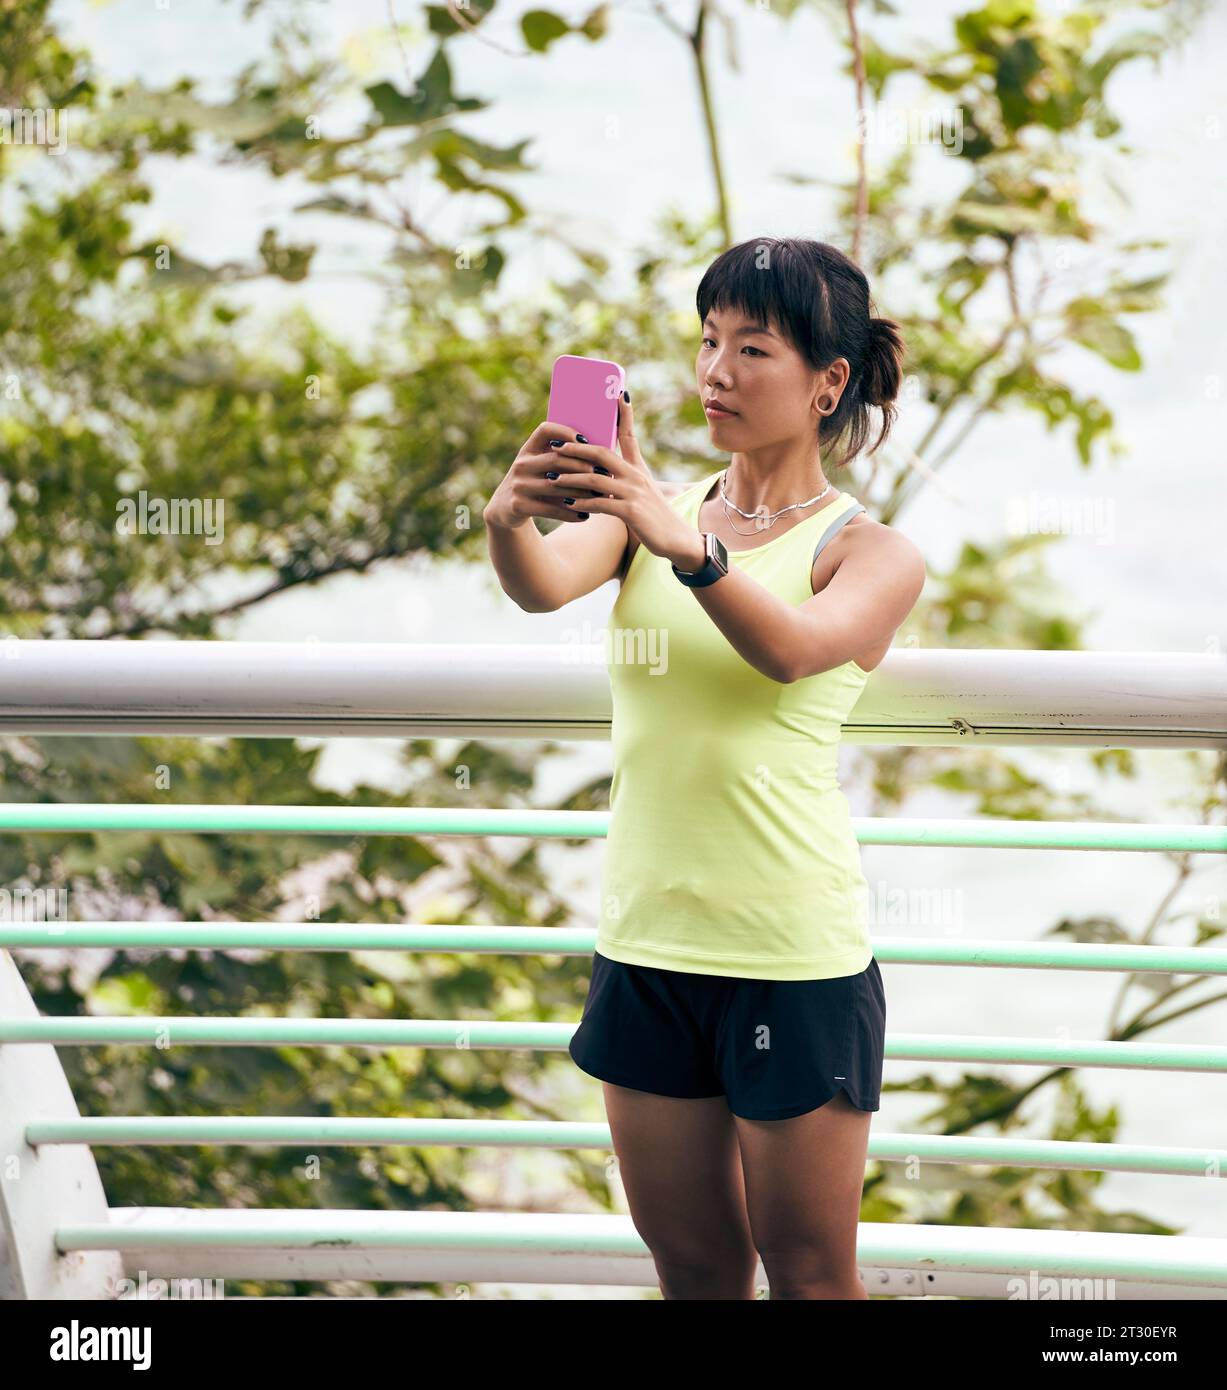 young asian woman taking a selfie outdoors using cellphone Stock Photo